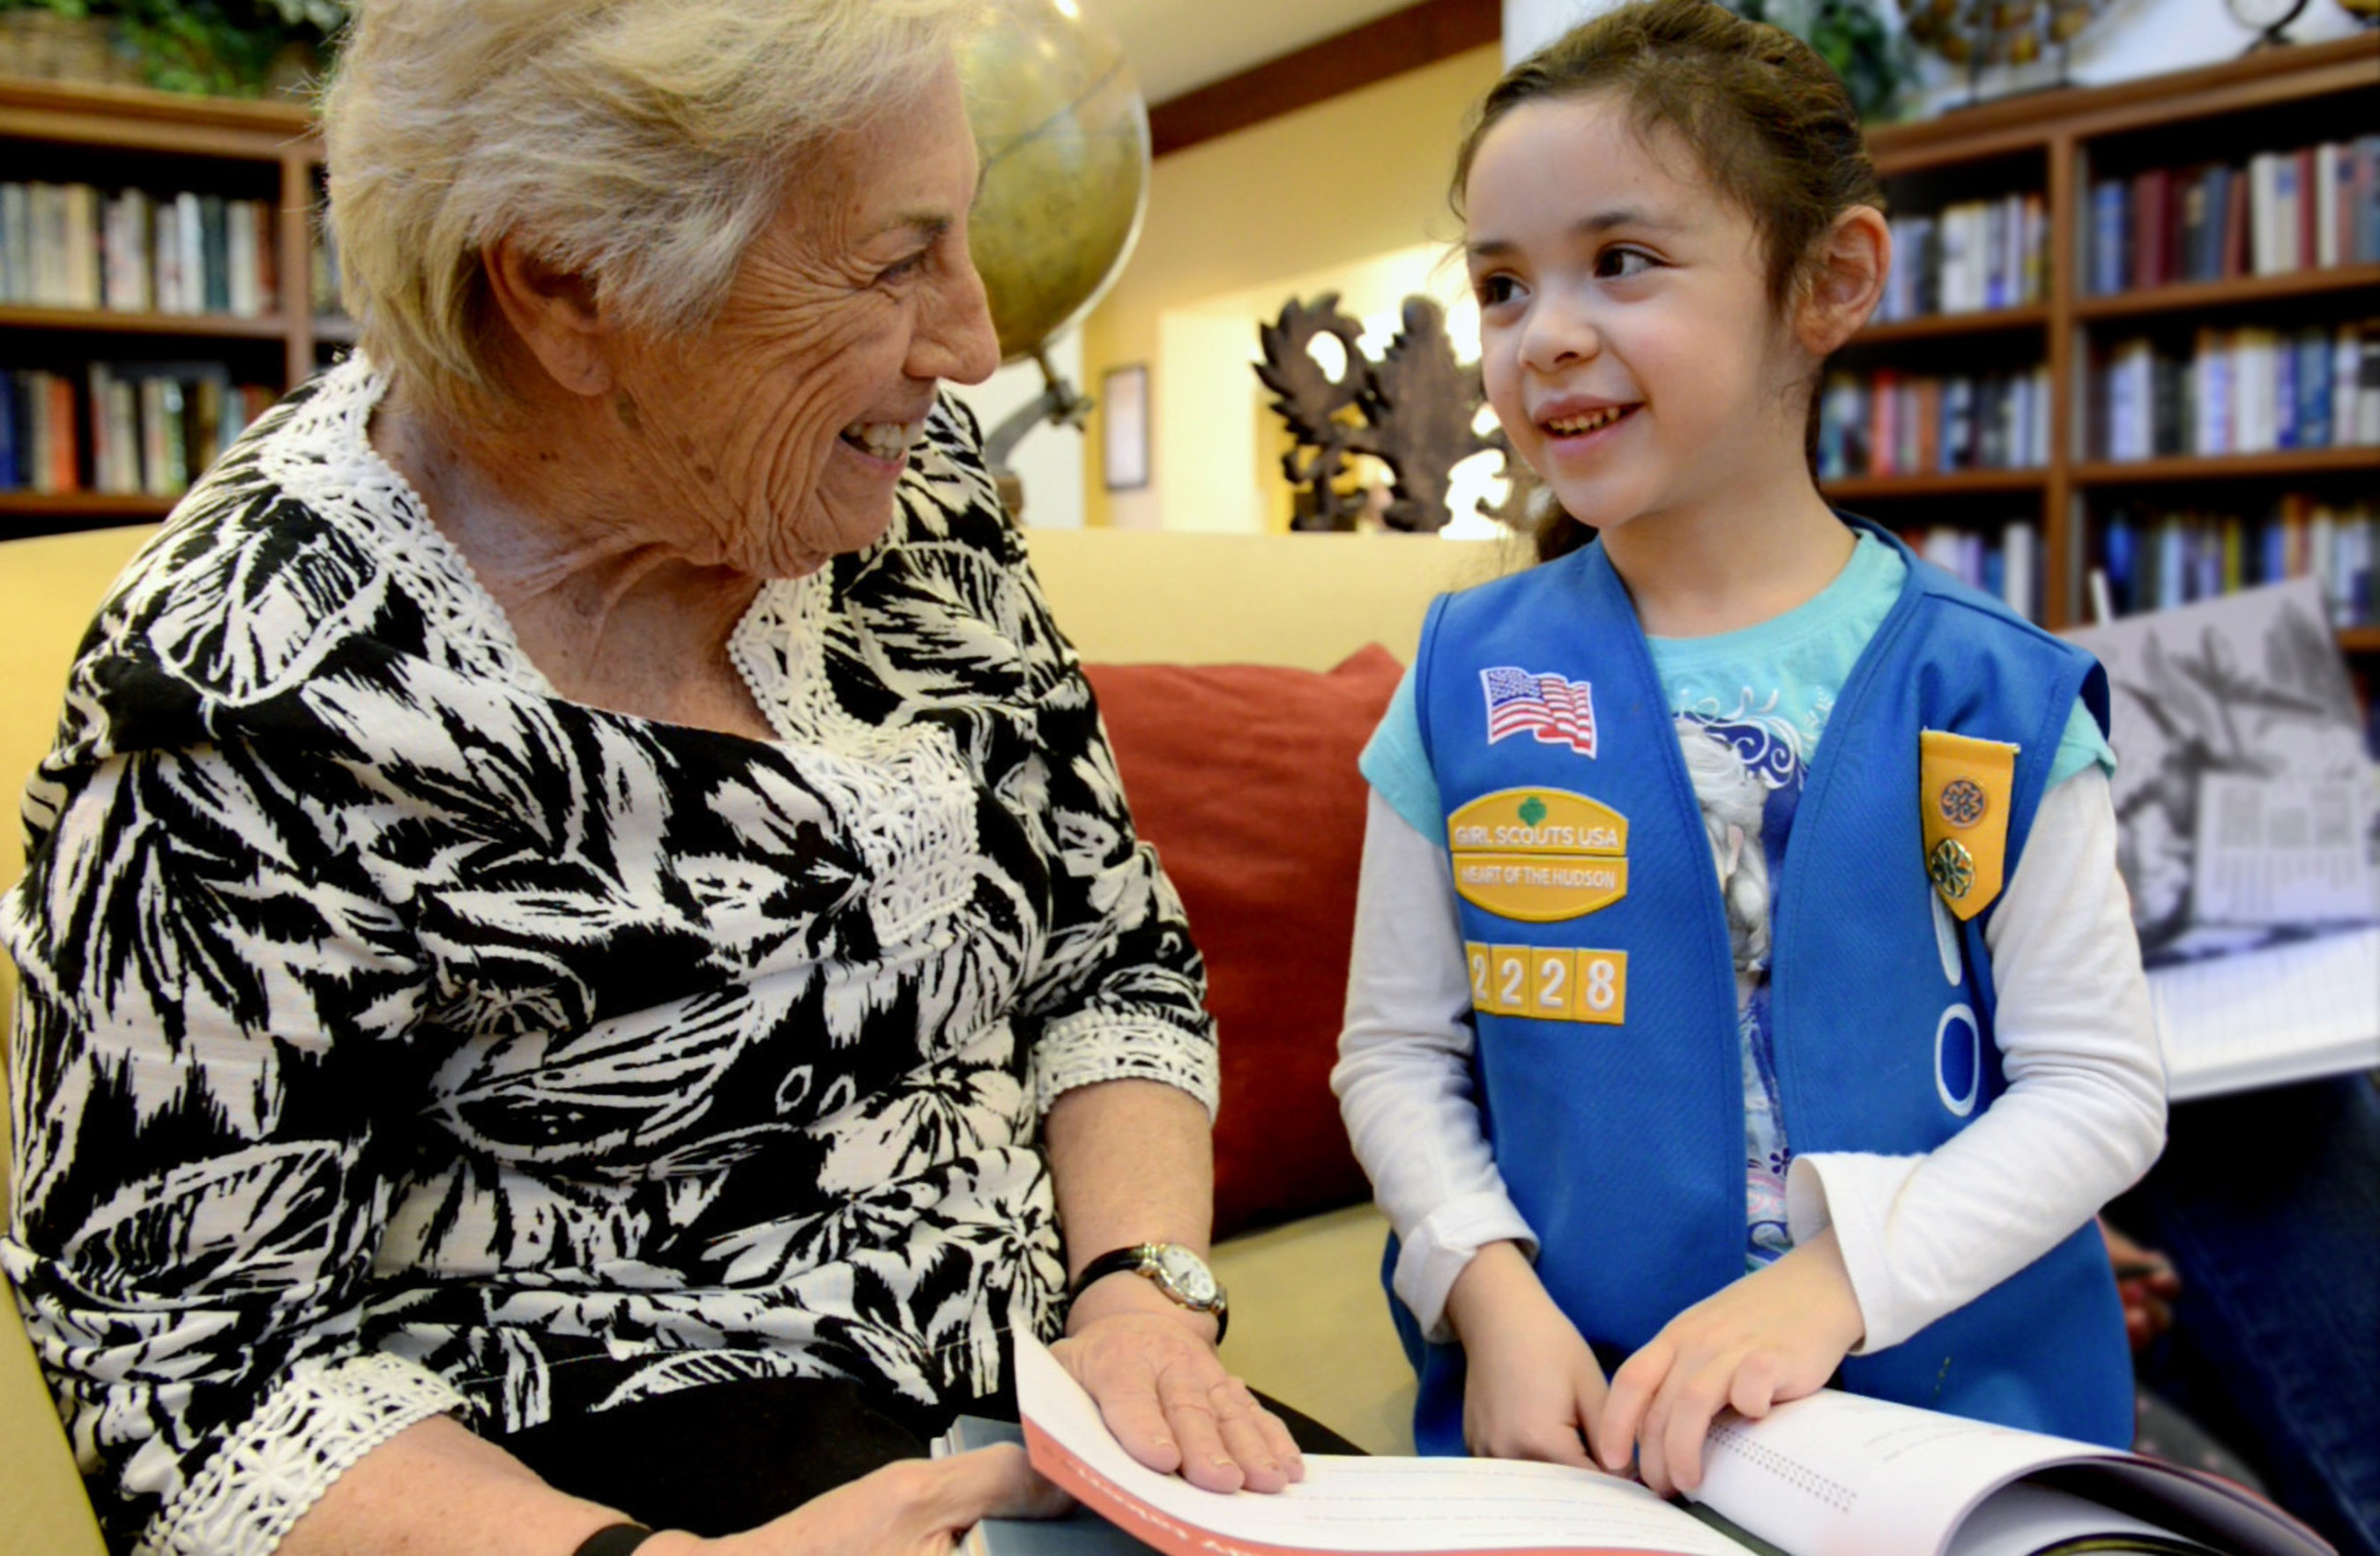 Atria resident and Girl Scout enjoy bonding over Atria Senior Living's Field Notes from an Adventurous Life: A Guided Journal.  The 130-page hardcover, award-winning journal provides a unique way for people to share their life stories and inspire future goals and aspirations. It was designed using vintage imagery, quotes and event-specific prompts to inspire interest and create conversation between multiple generations. Each of Atria's 21,000 residents have received a gift copy and a selection of youth groups, schools, staff and family members will be journaling along with residents across the country.